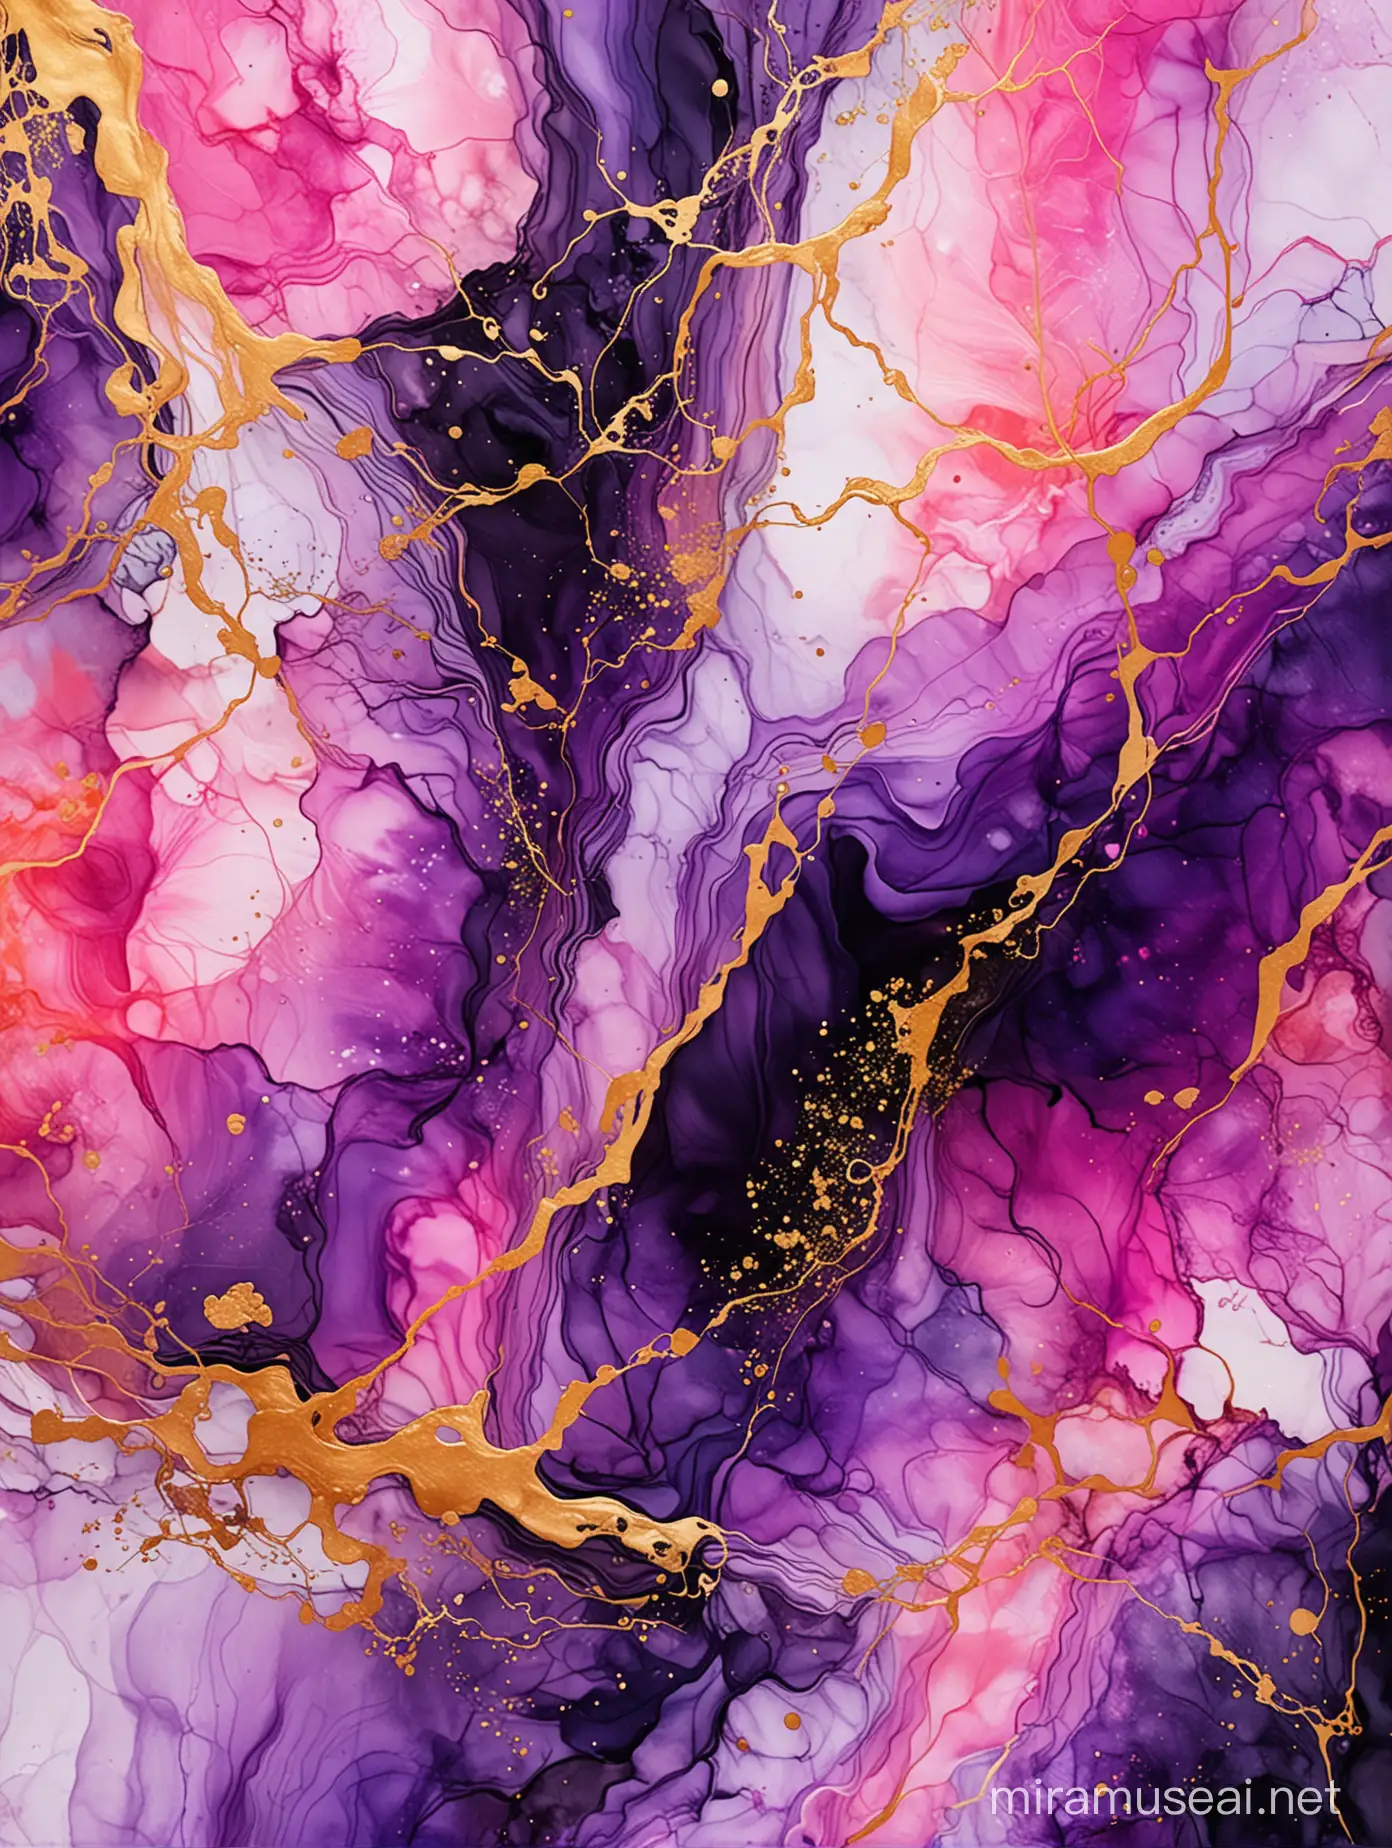 Vibrant Alcohol Ink Illustration with Pink Purple and Orange Colors